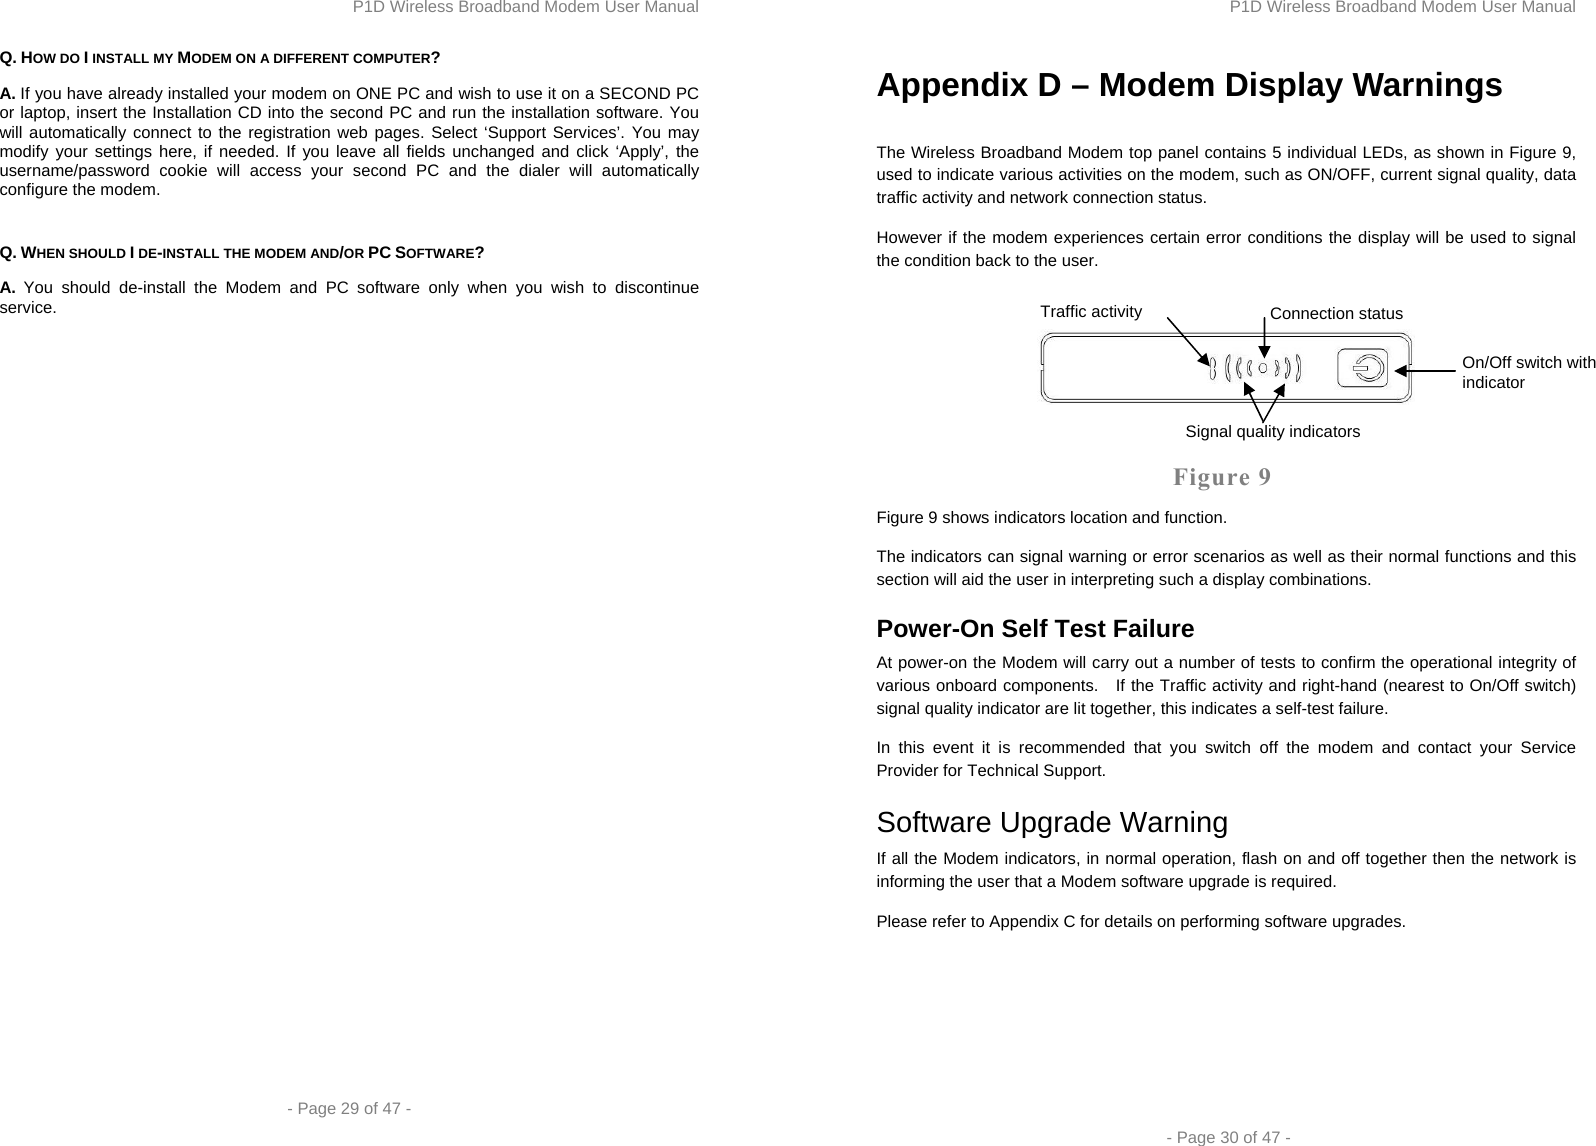 P1D Wireless Broadband Modem User Manual  - Page 29 of 47 -  Q. HOW DO I INSTALL MY MODEM ON A DIFFERENT COMPUTER? A. If you have already installed your modem on ONE PC and wish to use it on a SECOND PC or laptop, insert the Installation CD into the second PC and run the installation software. You will automatically connect to the registration web pages. Select ‘Support Services’. You may modify your settings here, if needed. If you leave all fields unchanged and click ‘Apply’, the username/password cookie will access your second PC and the dialer will automatically configure the modem.  Q. WHEN SHOULD I DE-INSTALL THE MODEM AND/OR PC SOFTWARE? A. You should de-install the Modem and PC software only when you wish to discontinue service. P1D Wireless Broadband Modem User Manual  - Page 30 of 47 - Appendix D – Modem Display Warnings  The Wireless Broadband Modem top panel contains 5 individual LEDs, as shown in Figure 9, used to indicate various activities on the modem, such as ON/OFF, current signal quality, data traffic activity and network connection status. However if the modem experiences certain error conditions the display will be used to signal the condition back to the user.    Figure 9 Figure 9 shows indicators location and function. The indicators can signal warning or error scenarios as well as their normal functions and this section will aid the user in interpreting such a display combinations. Power-On Self Test Failure At power-on the Modem will carry out a number of tests to confirm the operational integrity of various onboard components.   If the Traffic activity and right-hand (nearest to On/Off switch) signal quality indicator are lit together, this indicates a self-test failure. In this event it is recommended that you switch off the modem and contact your Service Provider for Technical Support. Software Upgrade Warning If all the Modem indicators, in normal operation, flash on and off together then the network is informing the user that a Modem software upgrade is required. Please refer to Appendix C for details on performing software upgrades.  On/Off switch with indicator Connection status Signal quality indicators Traffic activity 